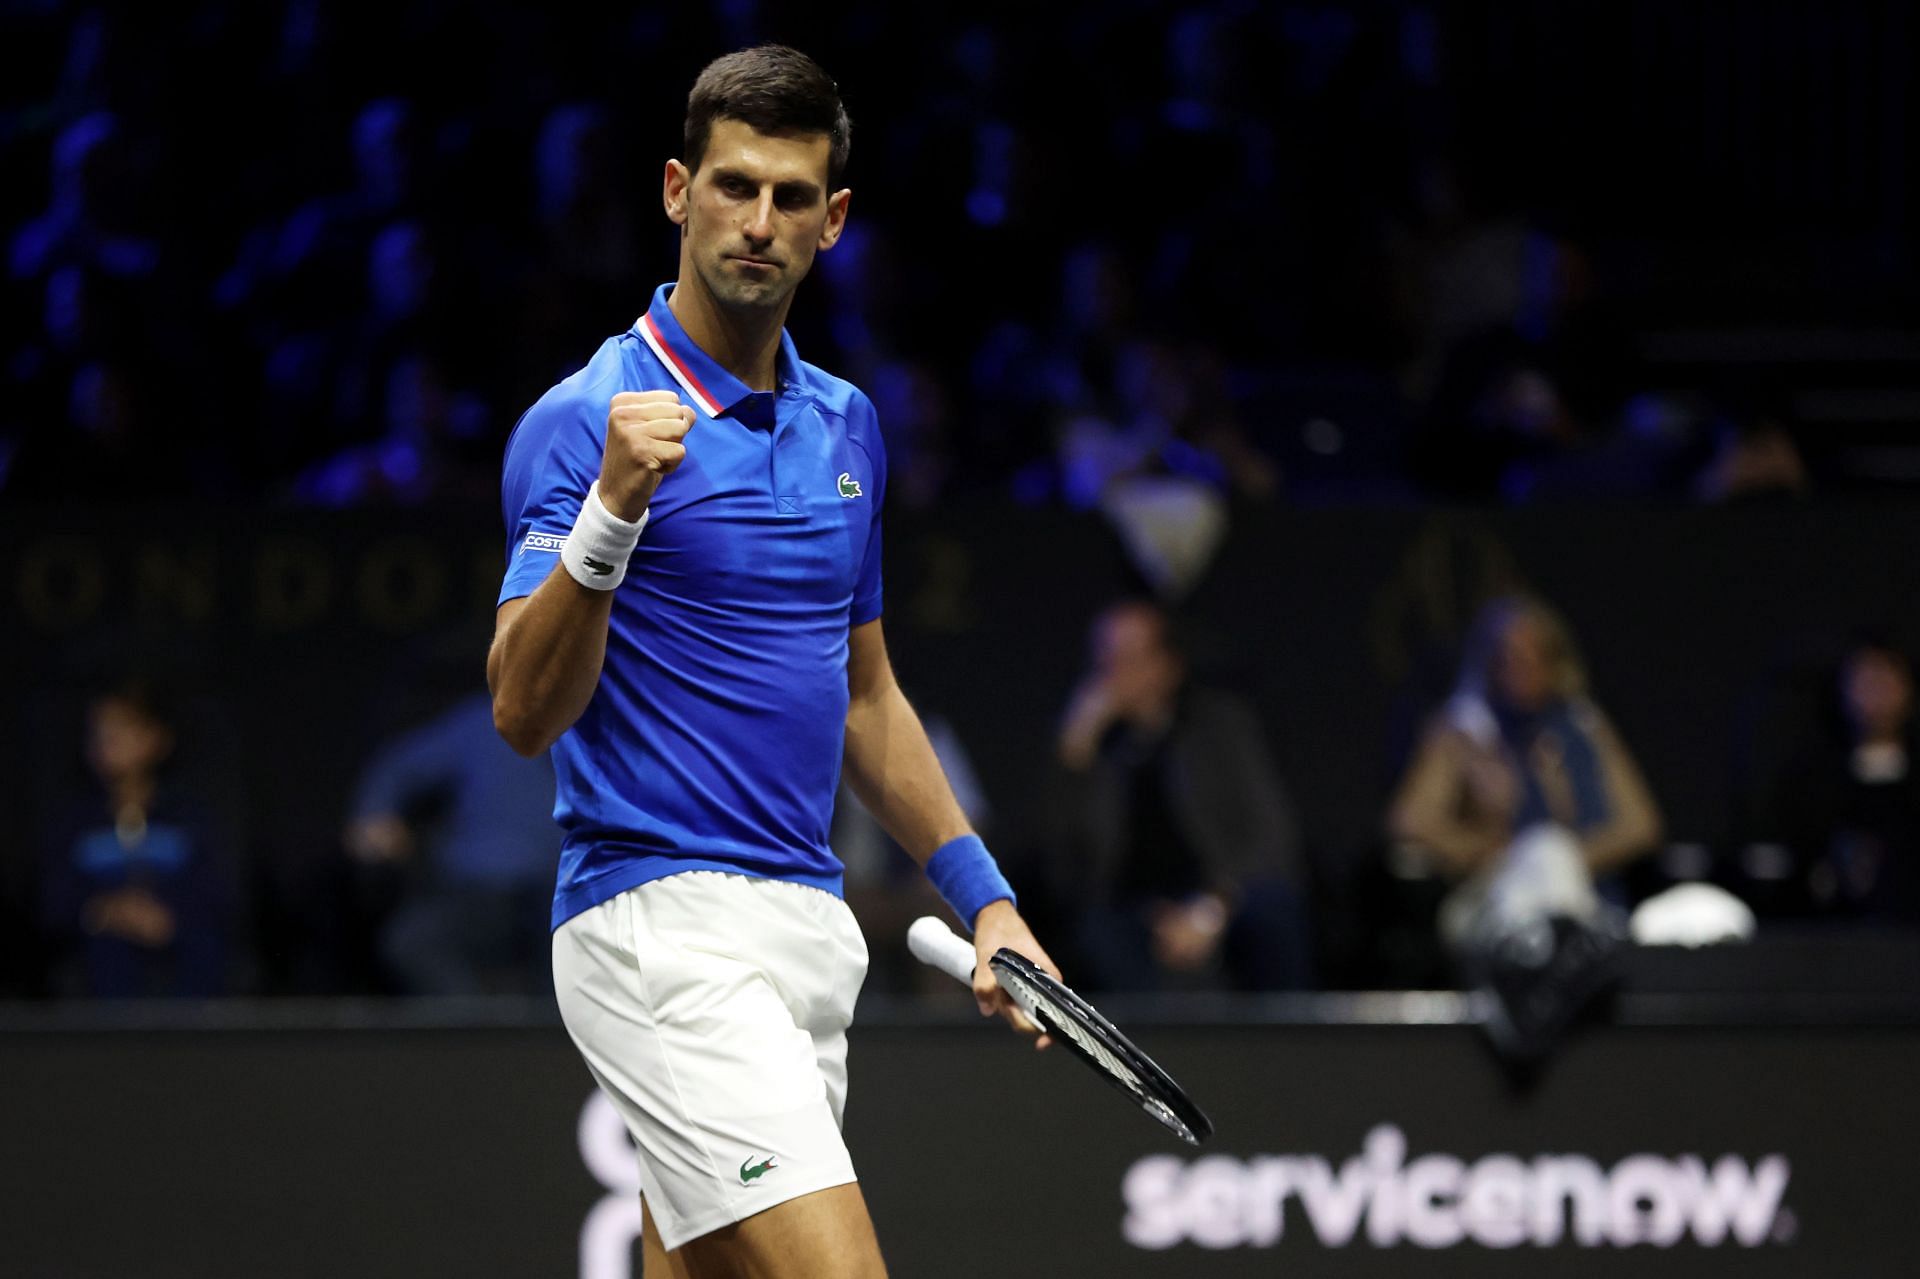 Novak Djokovic at the 2022 Laver Cup - Day Two